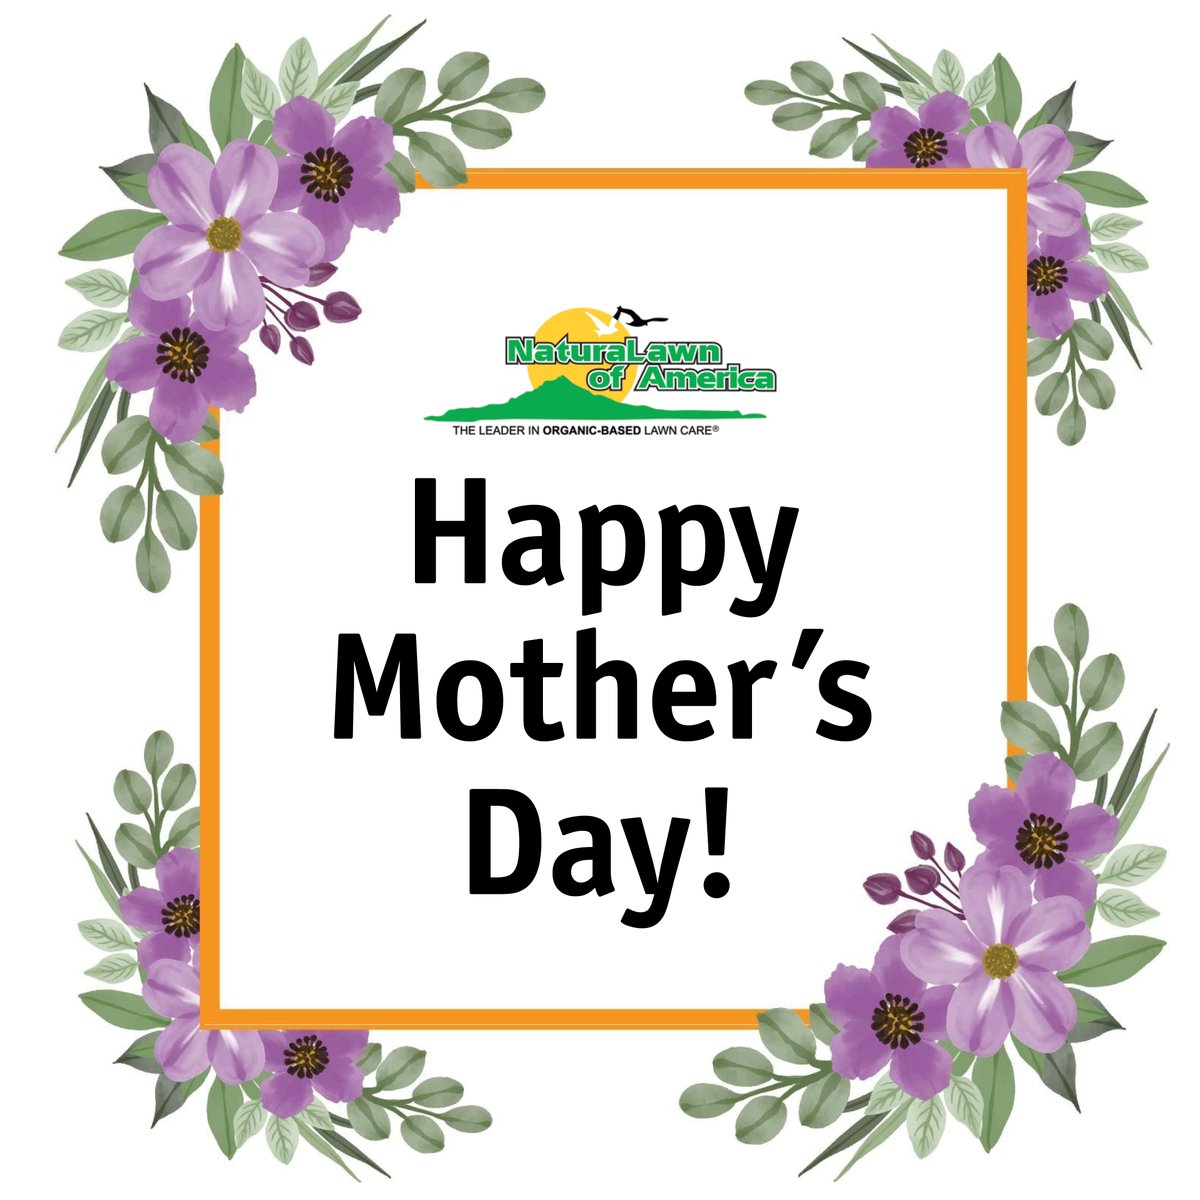 On this special day, we honor and appreciate the unconditional love and sacrifices of mothers everywhere. Happy Mother’s Day! #NaturaLawn #NaturaLawnOfAmerica #NLA #MothersDay